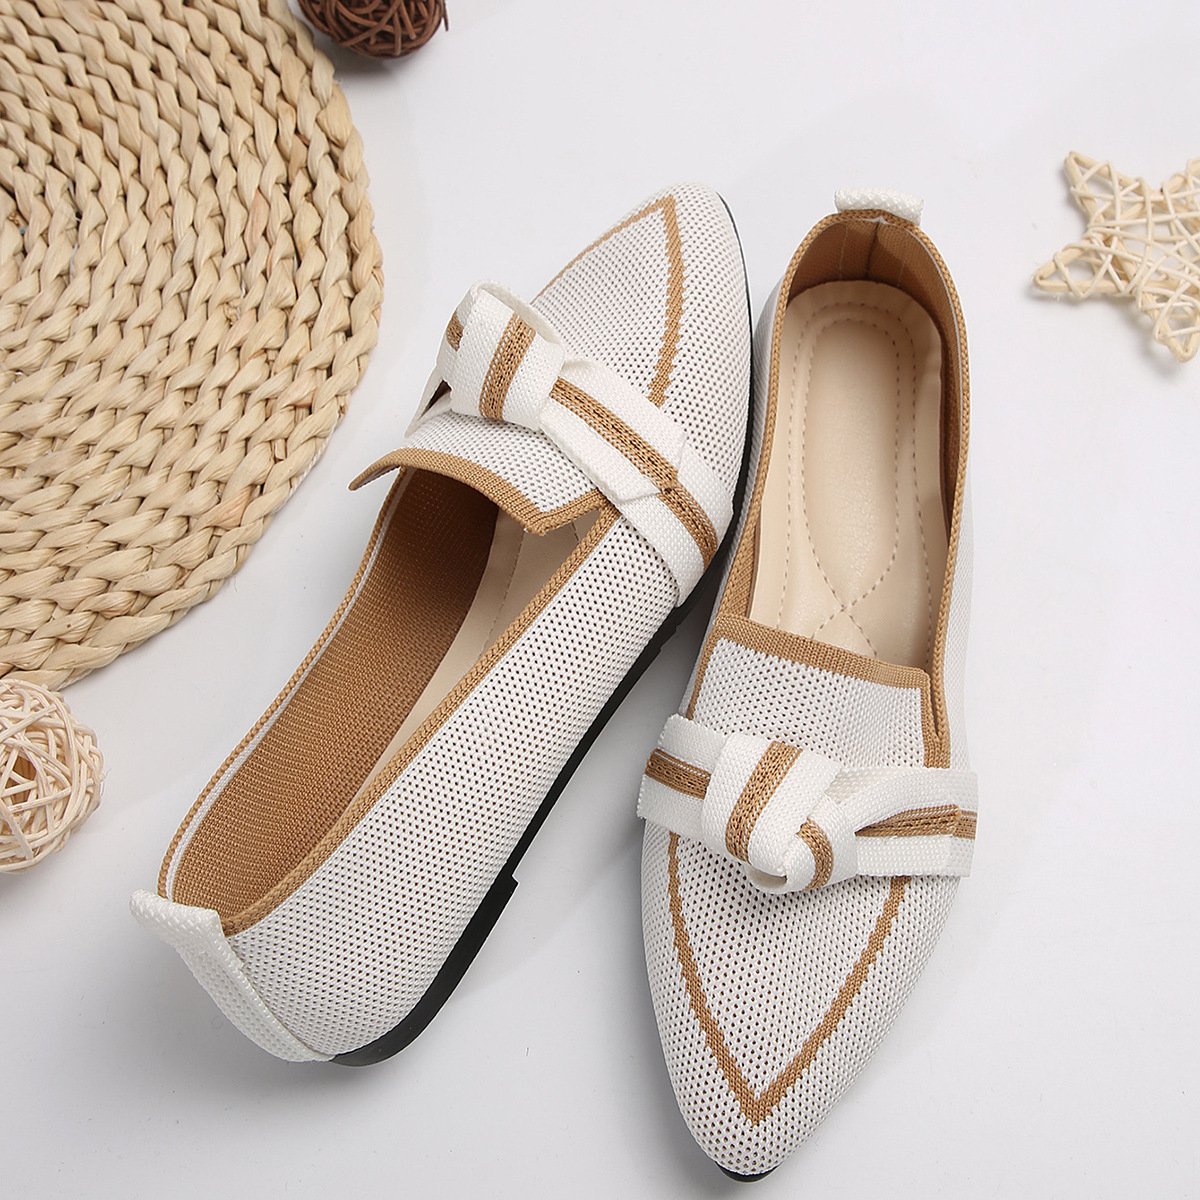 Women's Knit Fabric Bow Loafer Flats